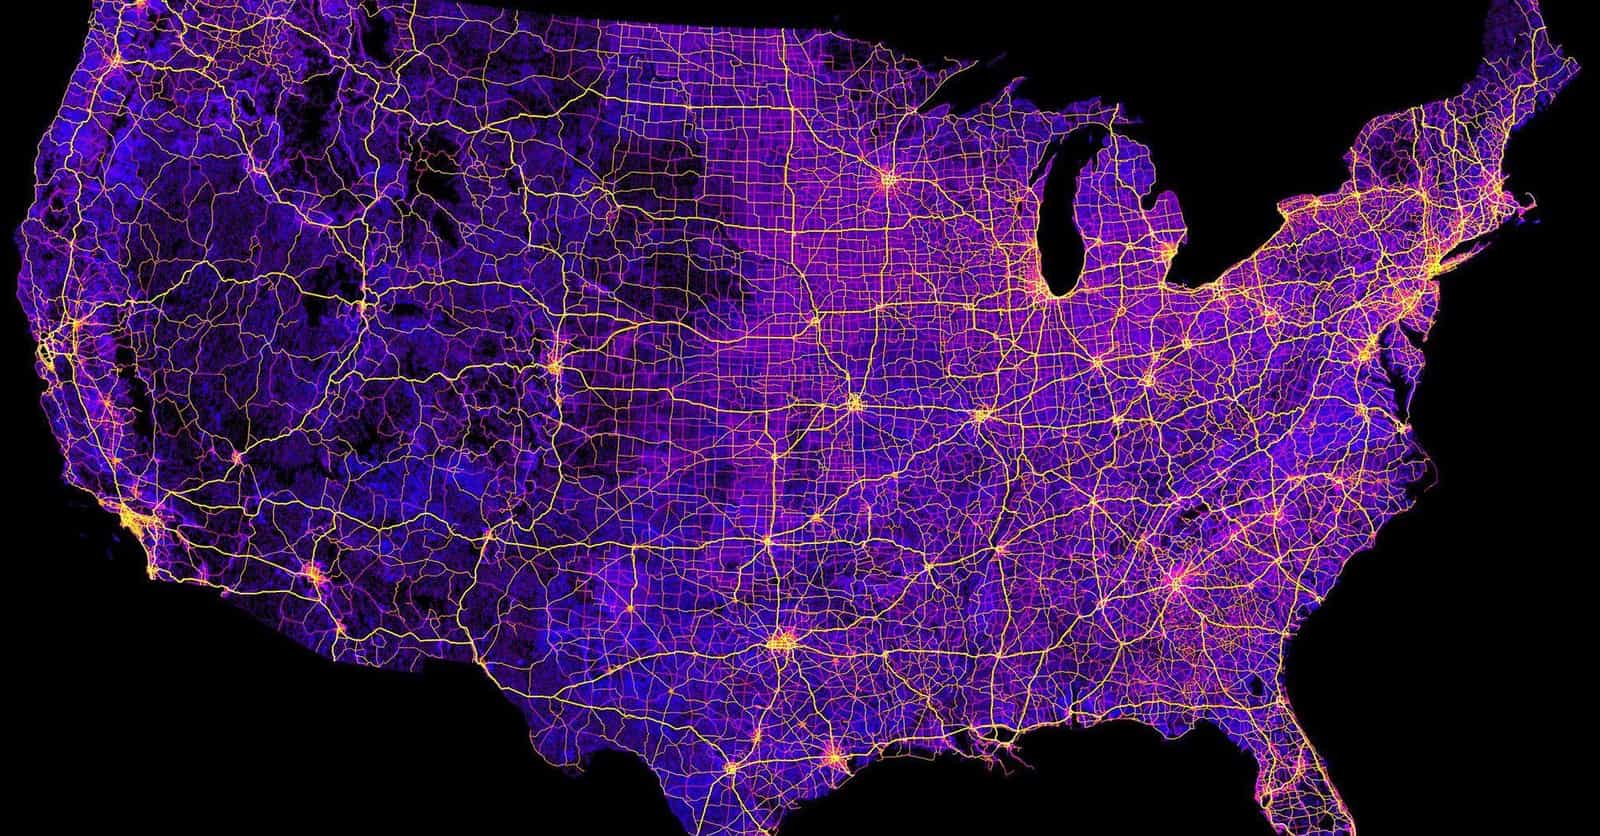 18 Maps Of The United States That Made Us Say 'Whoa'